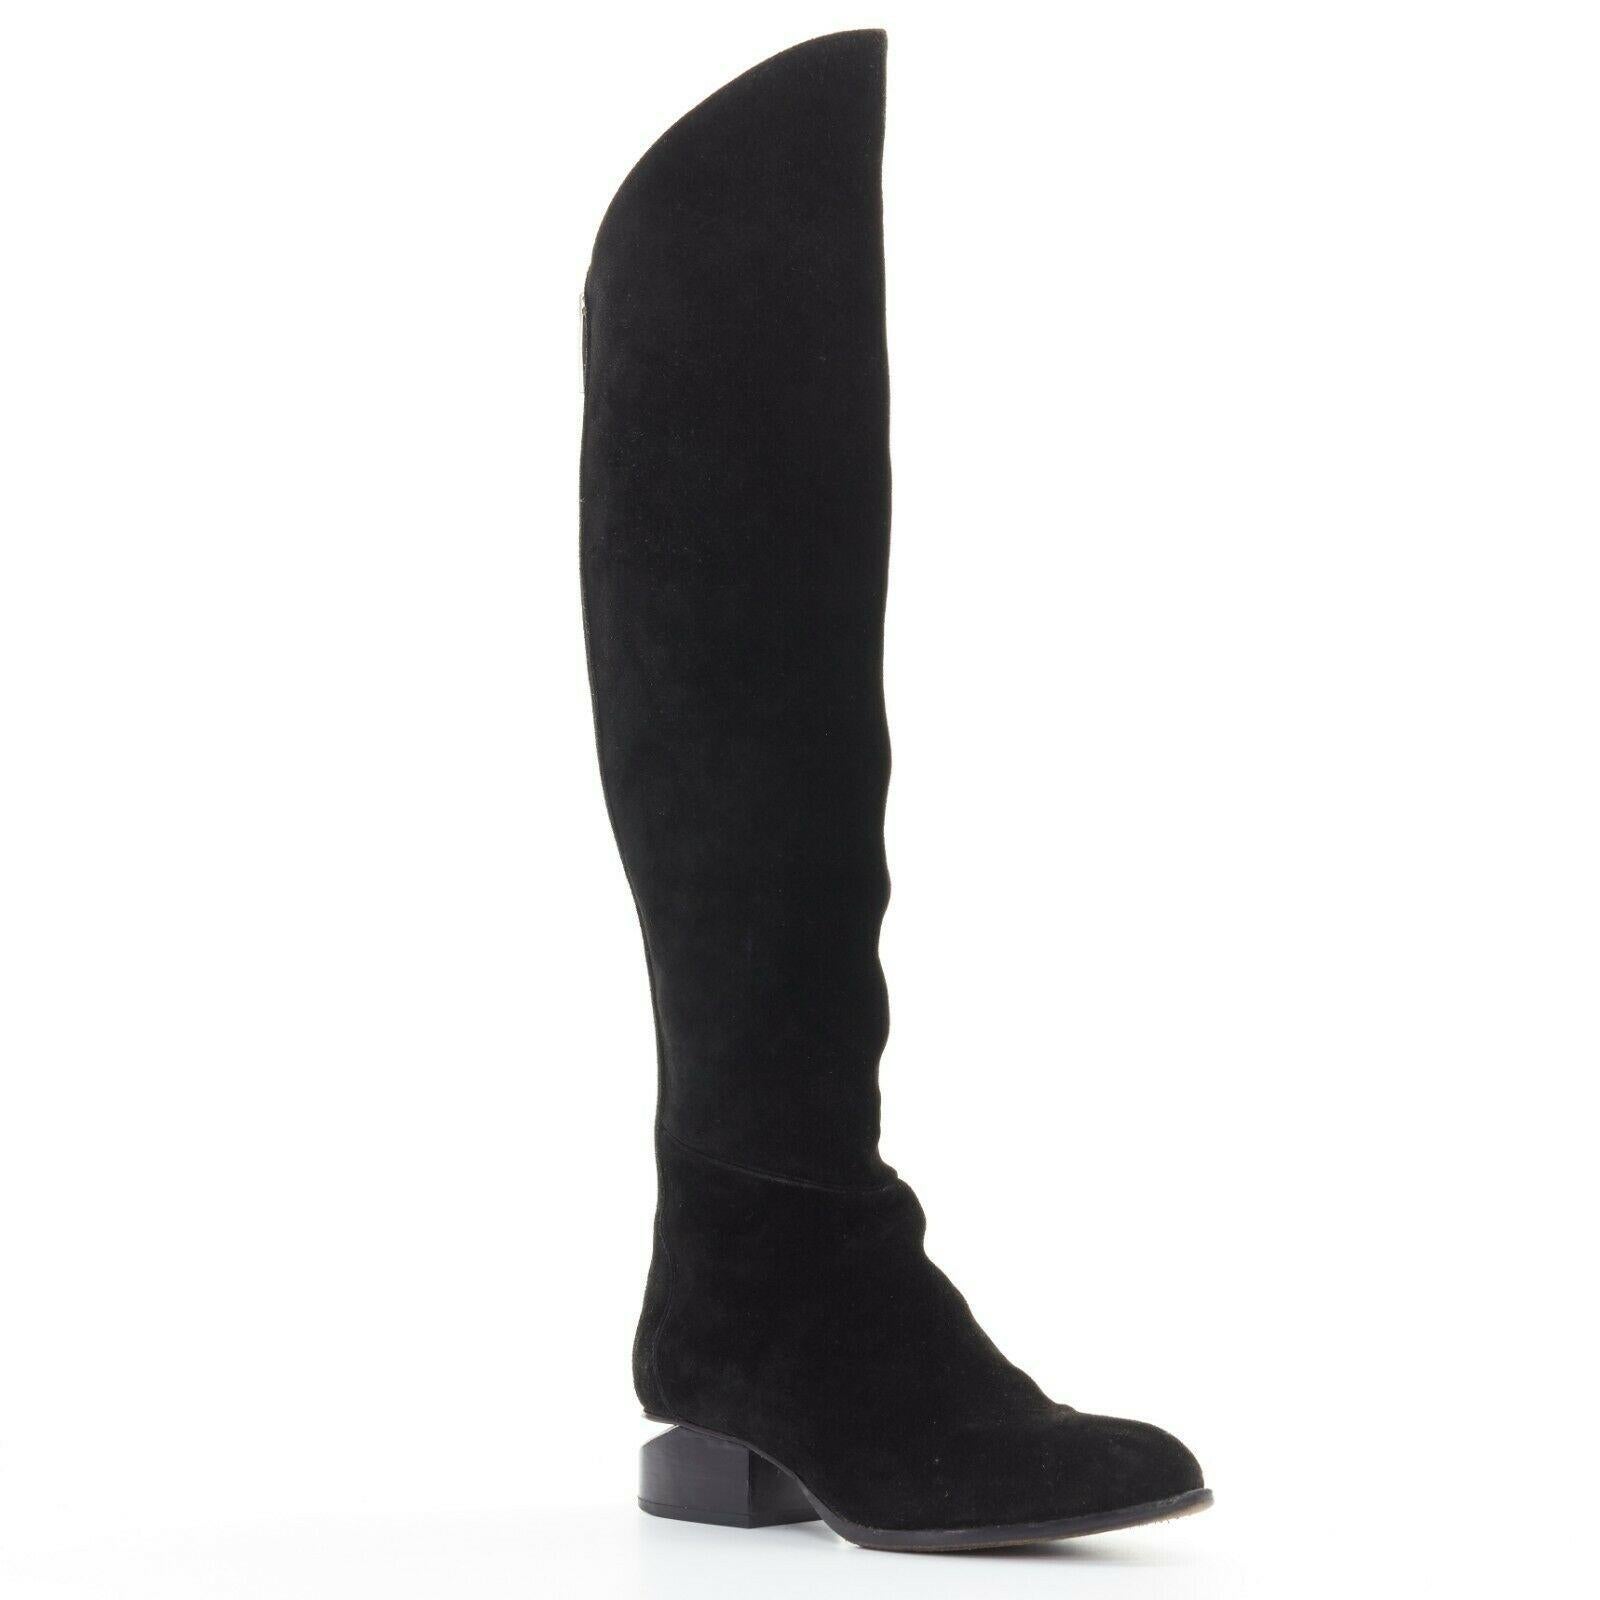 ALEXANDER WANG Sigrid black suede leather zip back cut out heel knee boot EU37

ALEXANDER WANG
Sigrid boot. Black suede leather upper. Silver-tone hardware. Signature cut out stacked heel. Exposed zip trimming at back. Pointed almond toe. Knee high